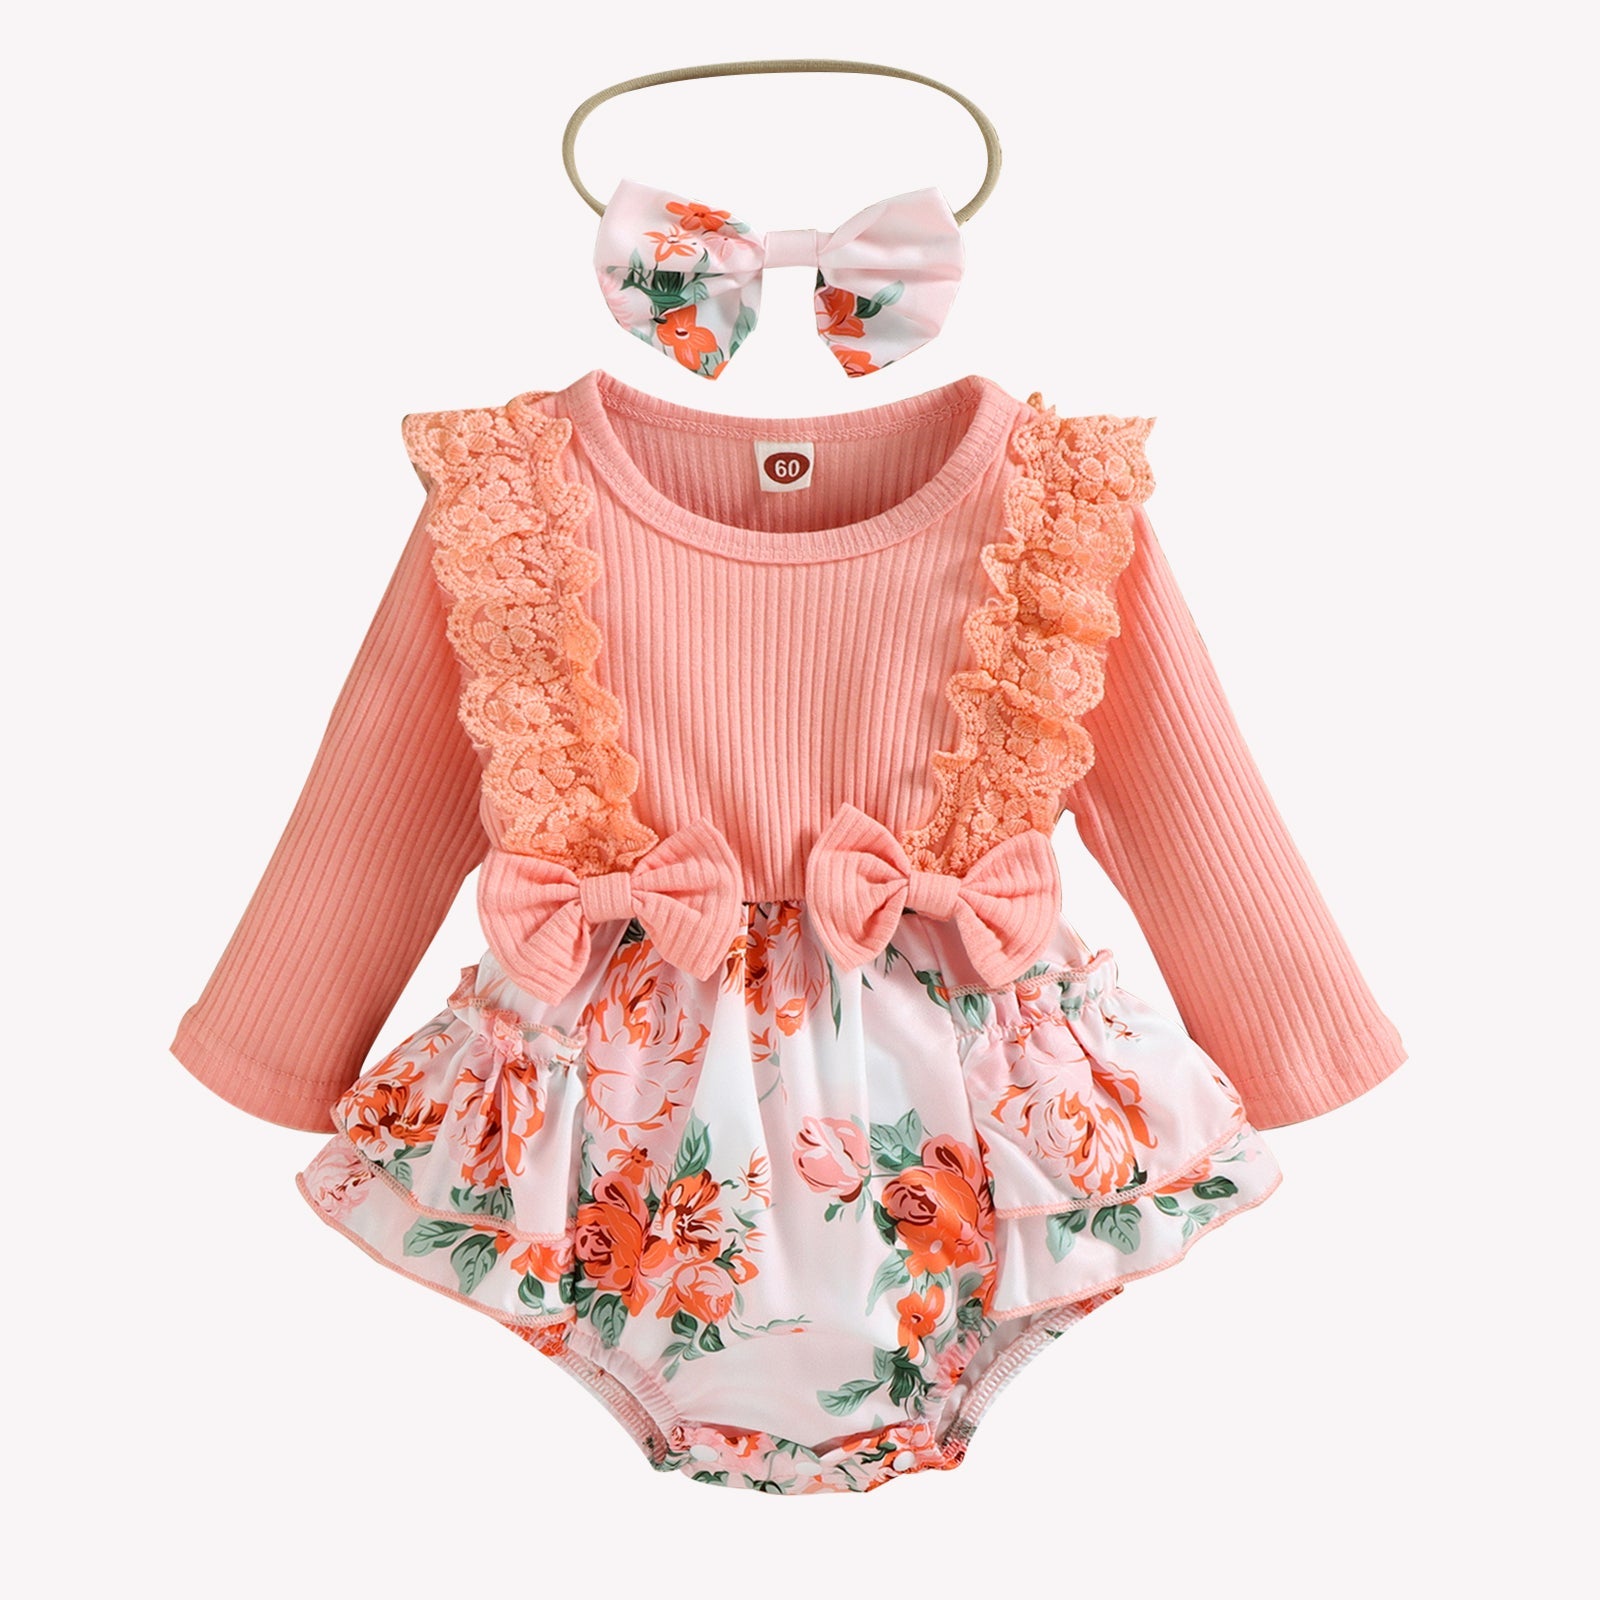 2-Piece Baby Lace Romper.